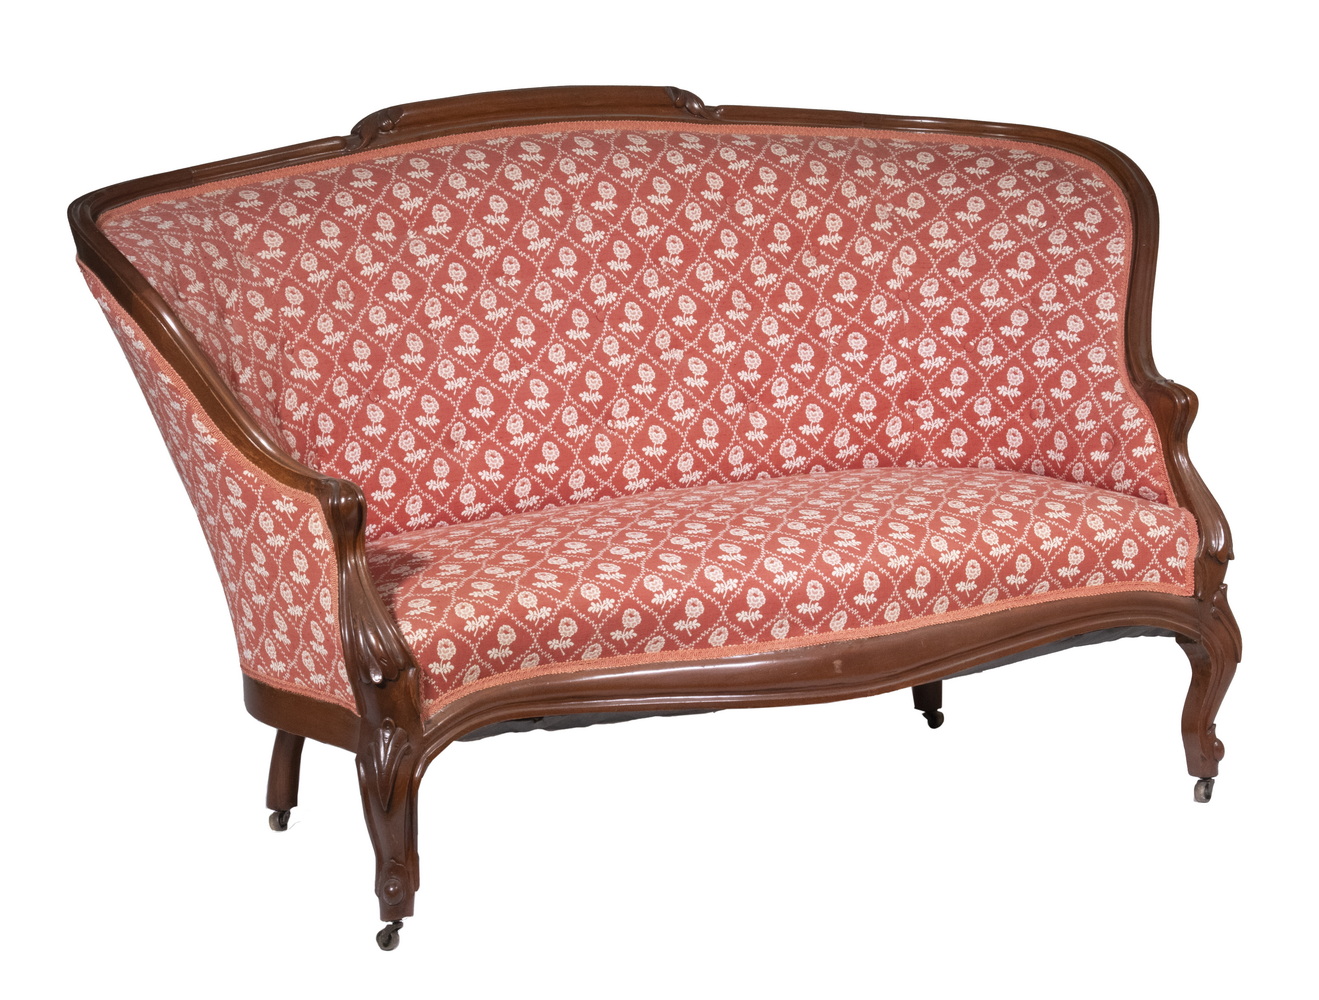 VICTORIAN UPHOLSTERED SETTEE 19th